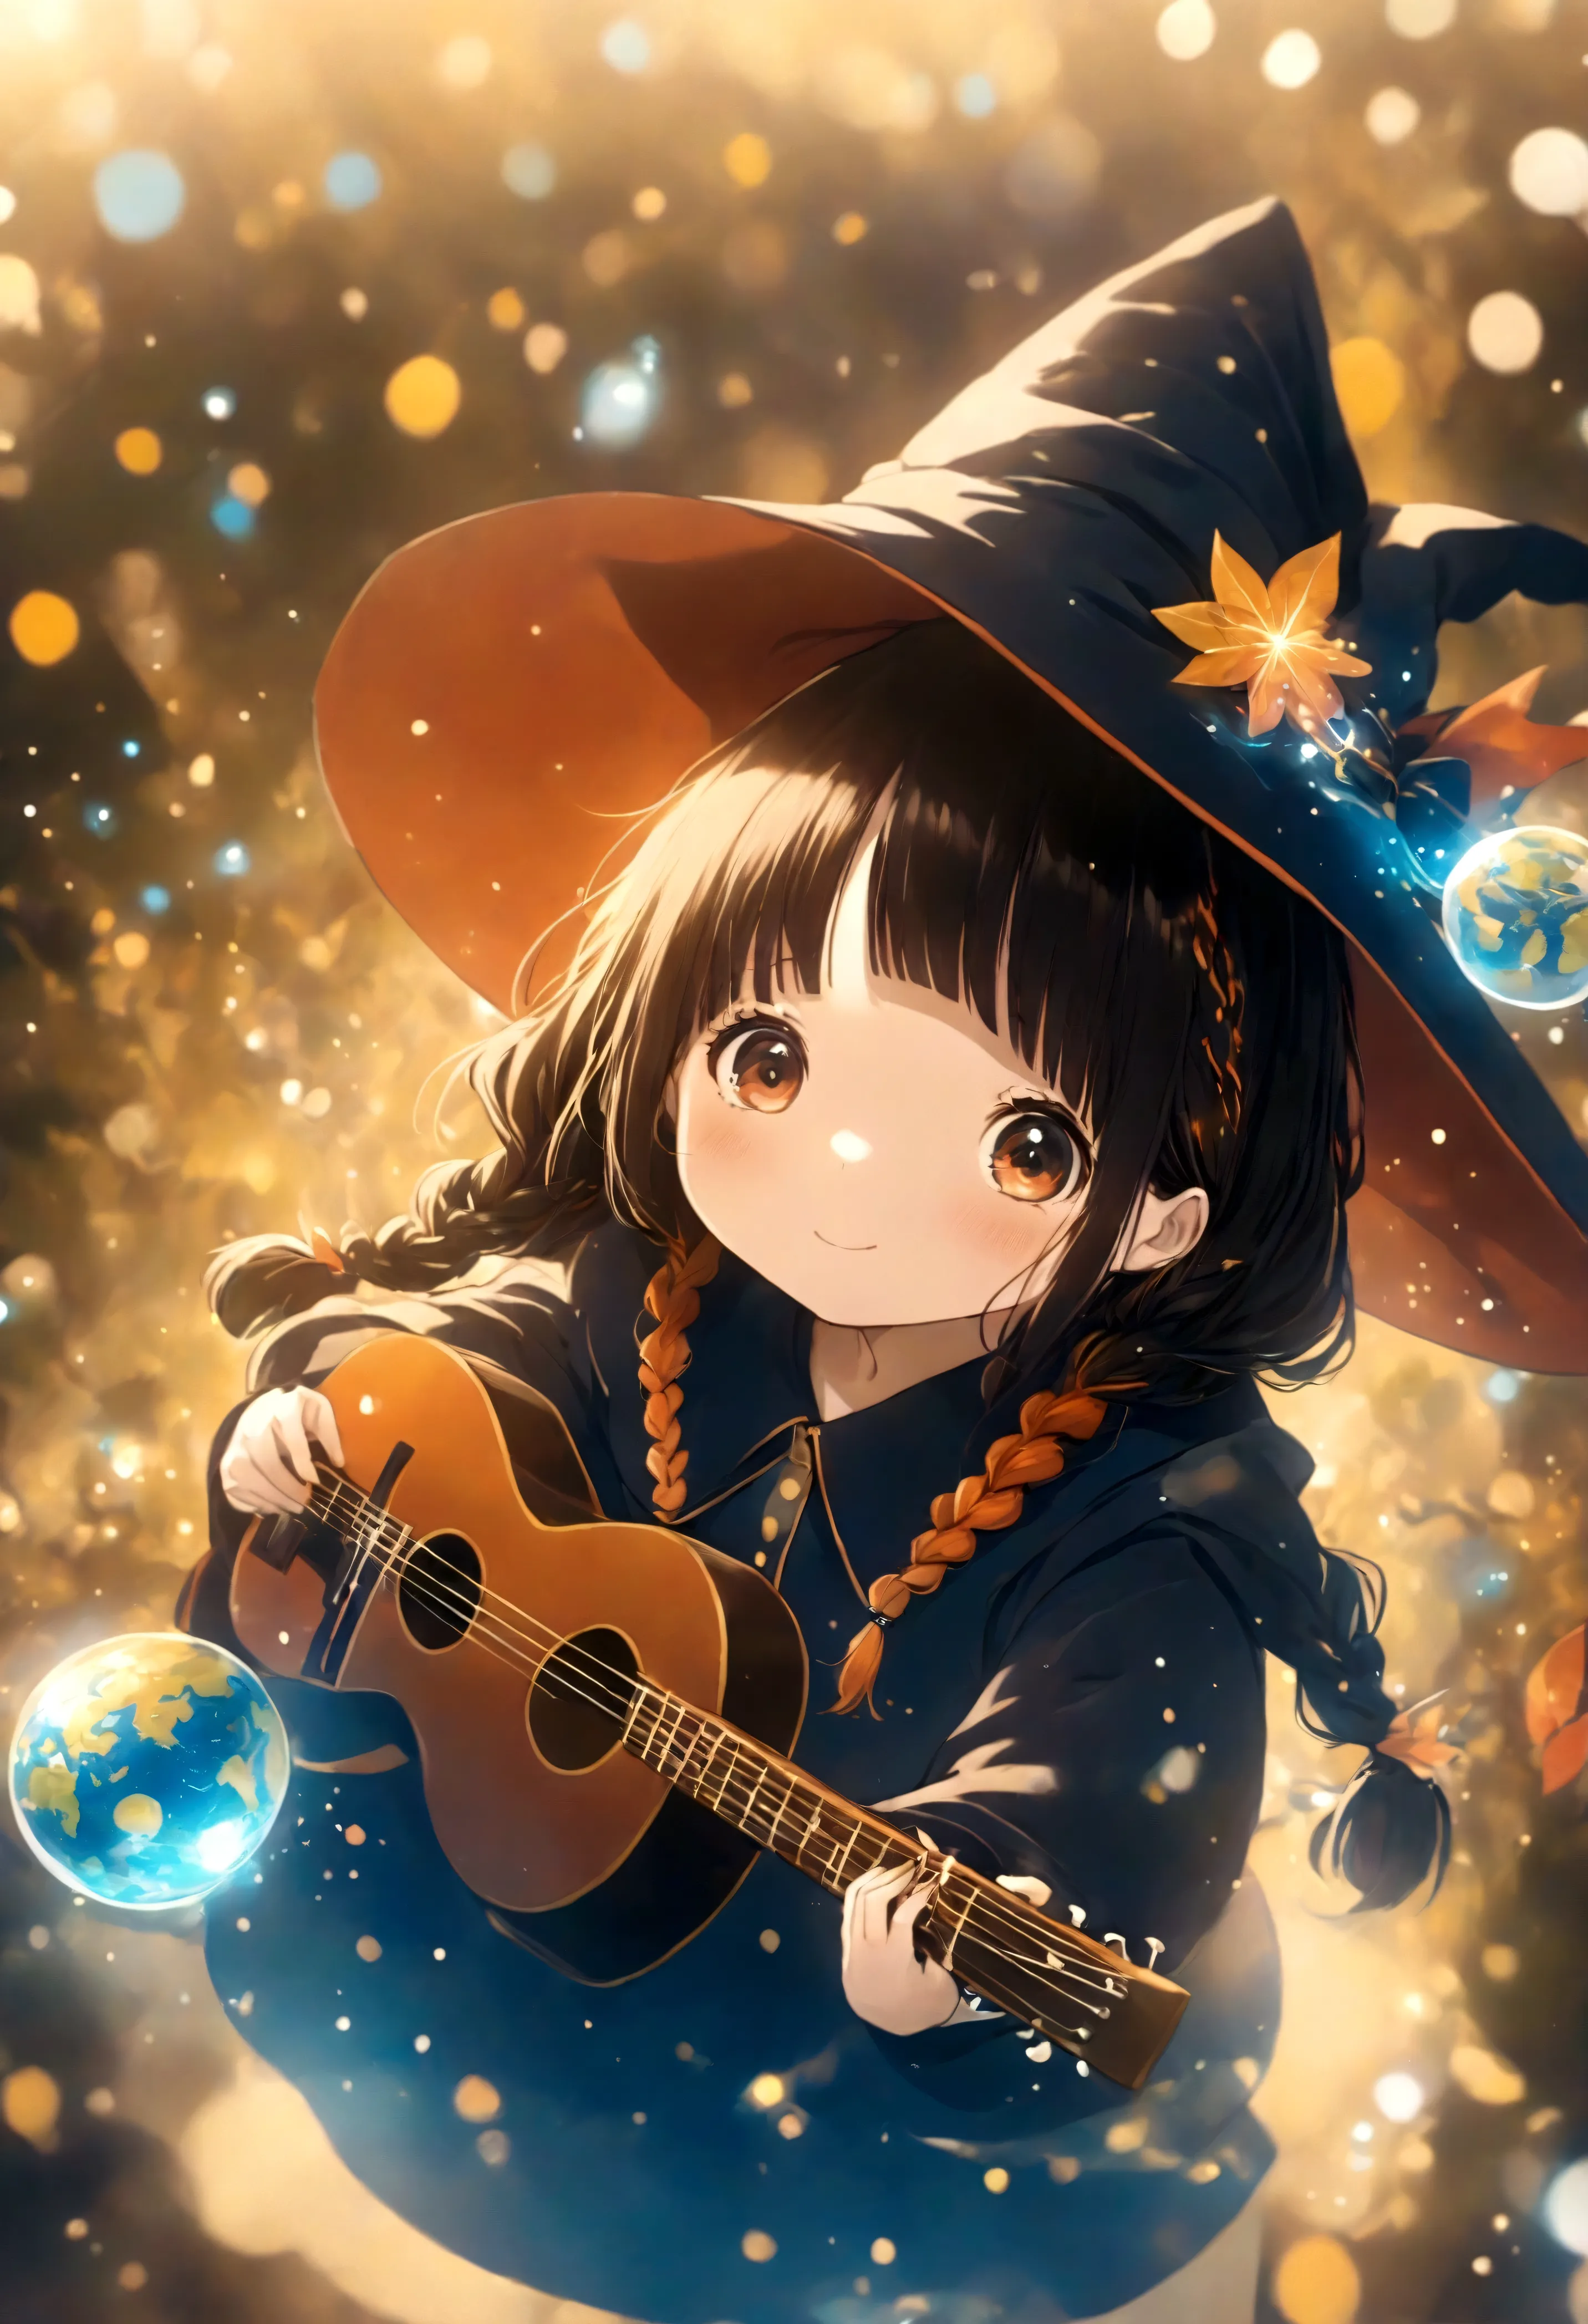 With red twin braids、, Cute anime style Hagrid, a young witch, Anime cute art style, Marisa Kirisame, Witch Girl, Anime Characte...